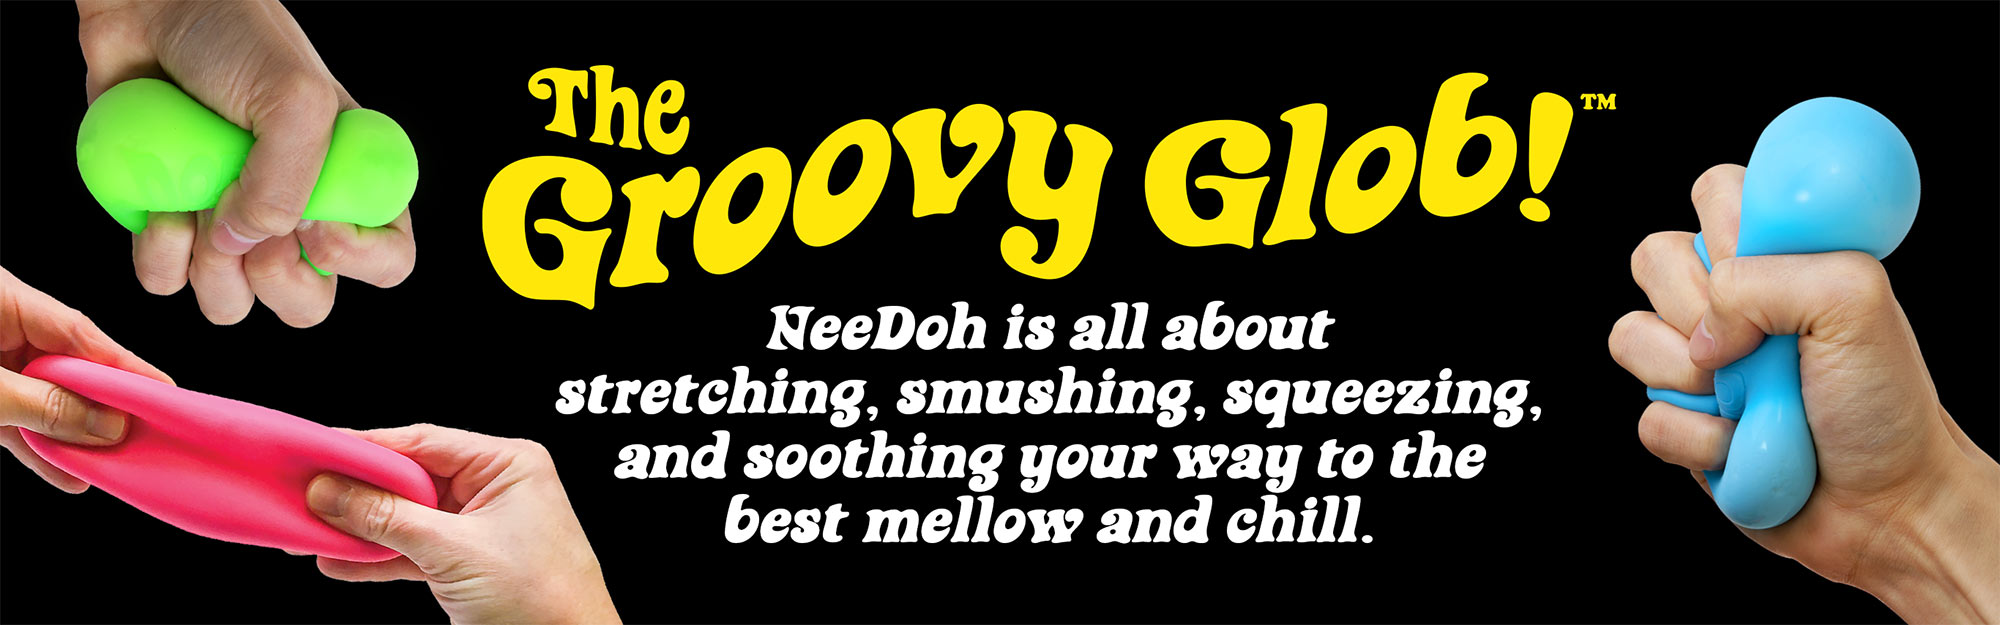 The Groovy Glob - NeeDoh is all about stretching, smushing, squeezing, and soothing your way to the best mellow and chill.